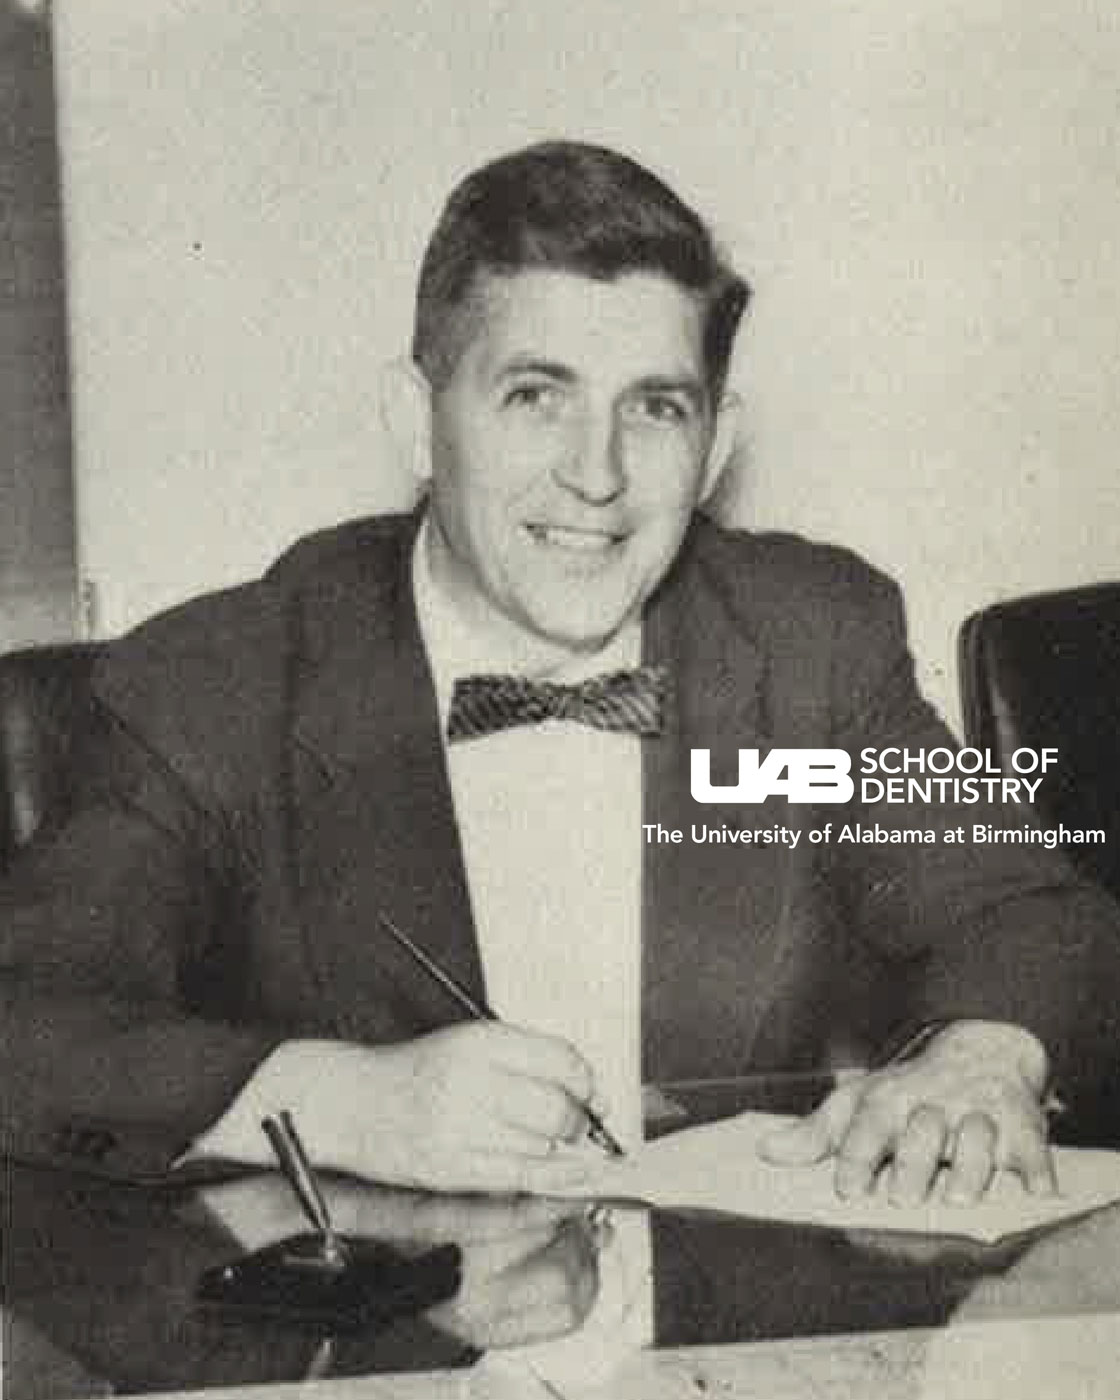 Black and white image of Dr. Volker, wearing a dark suit and striped bow tie, setting a polished desk signing a paper.